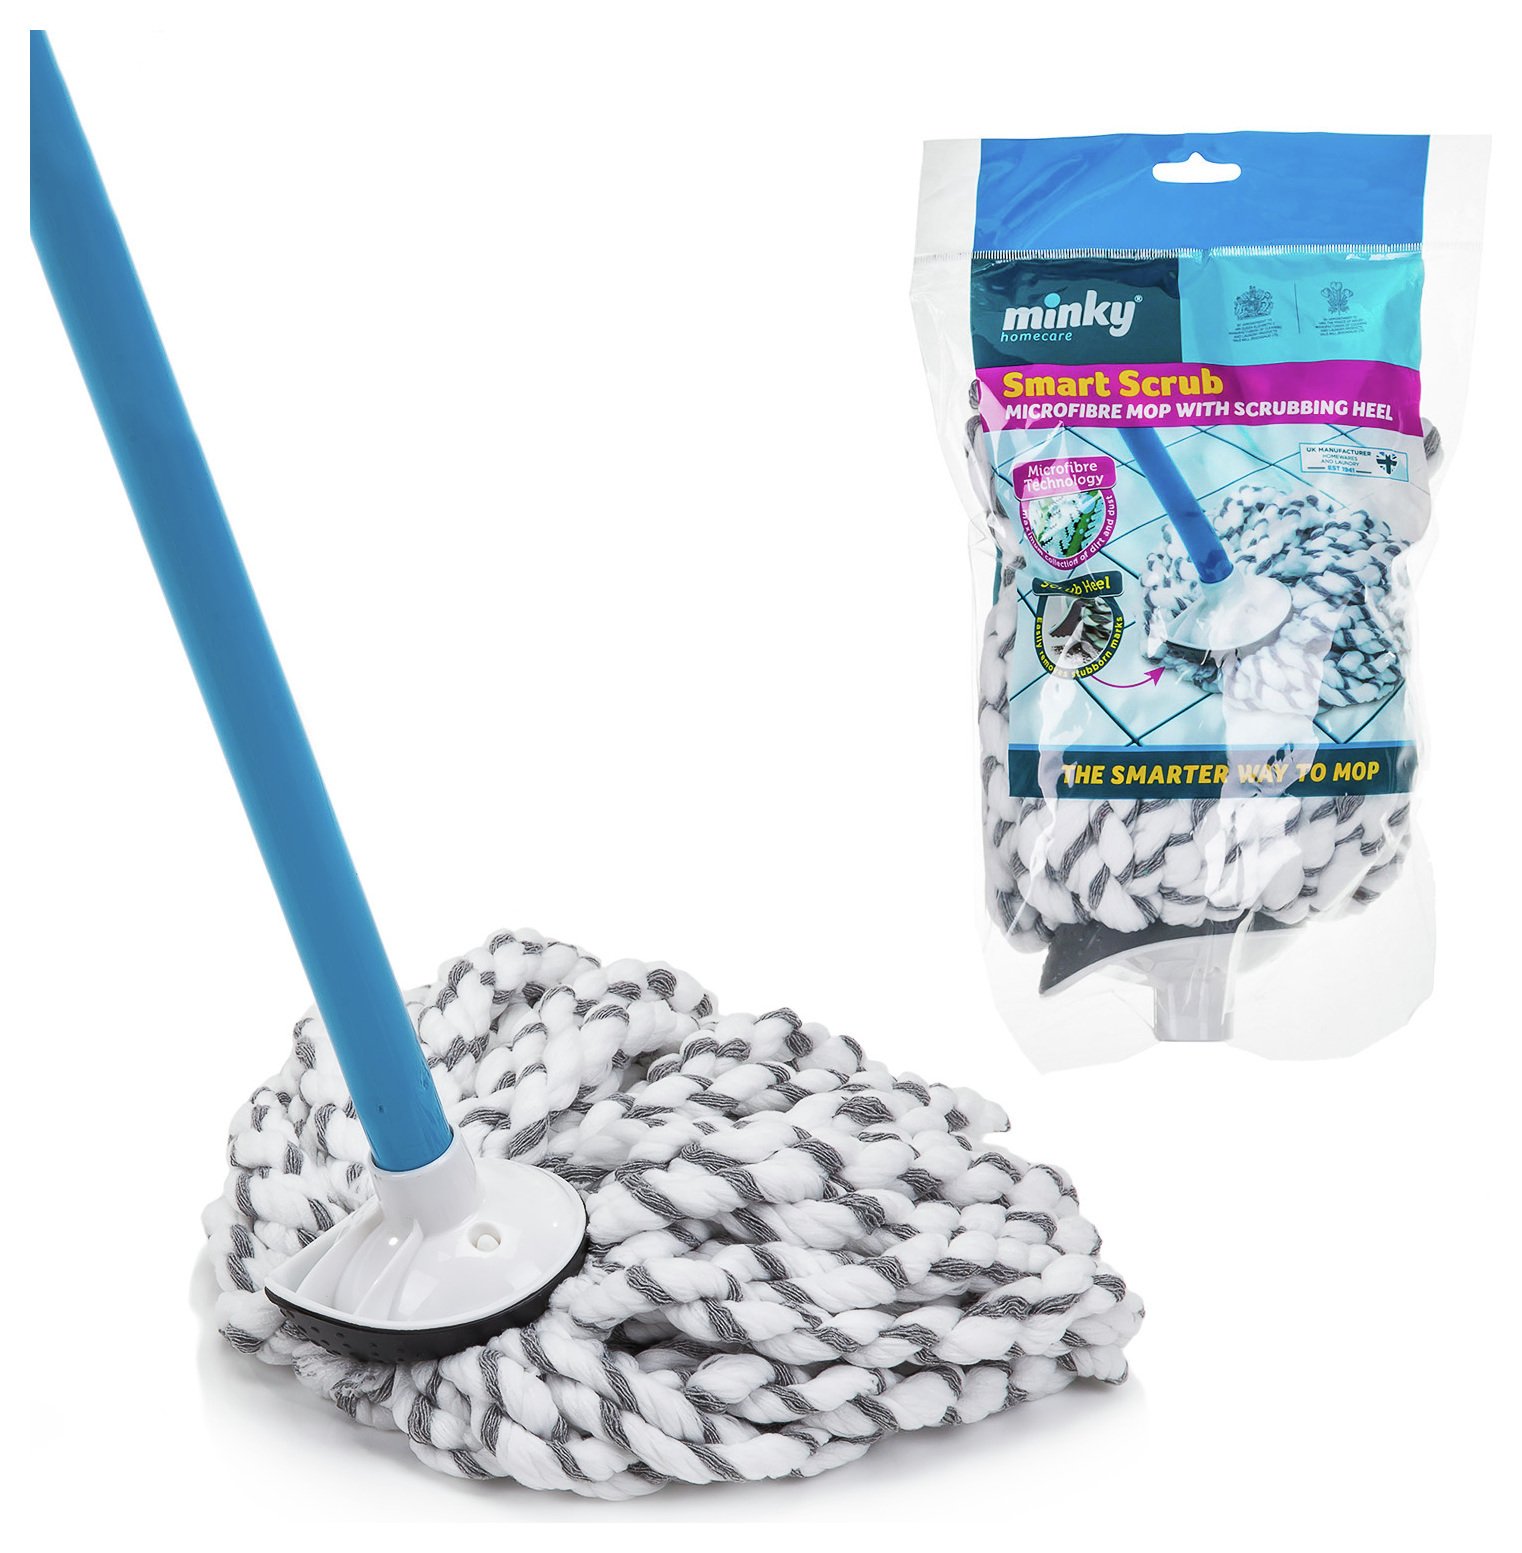 Minky Smart Scrub Microfibre Mop and Replacement Head.